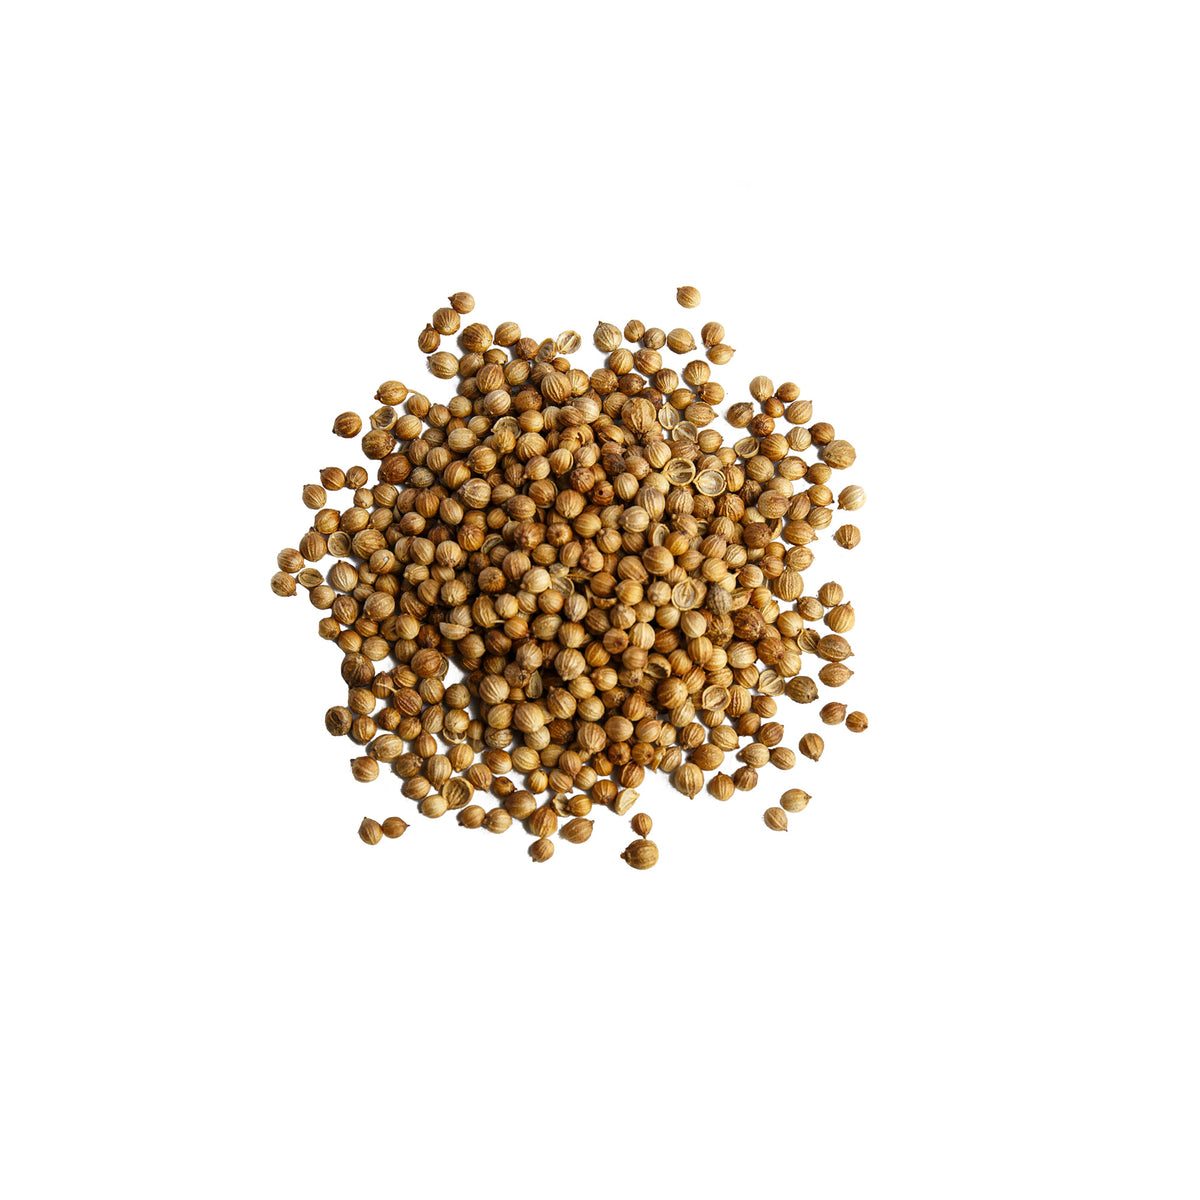 Primary Image of Coriander Seed